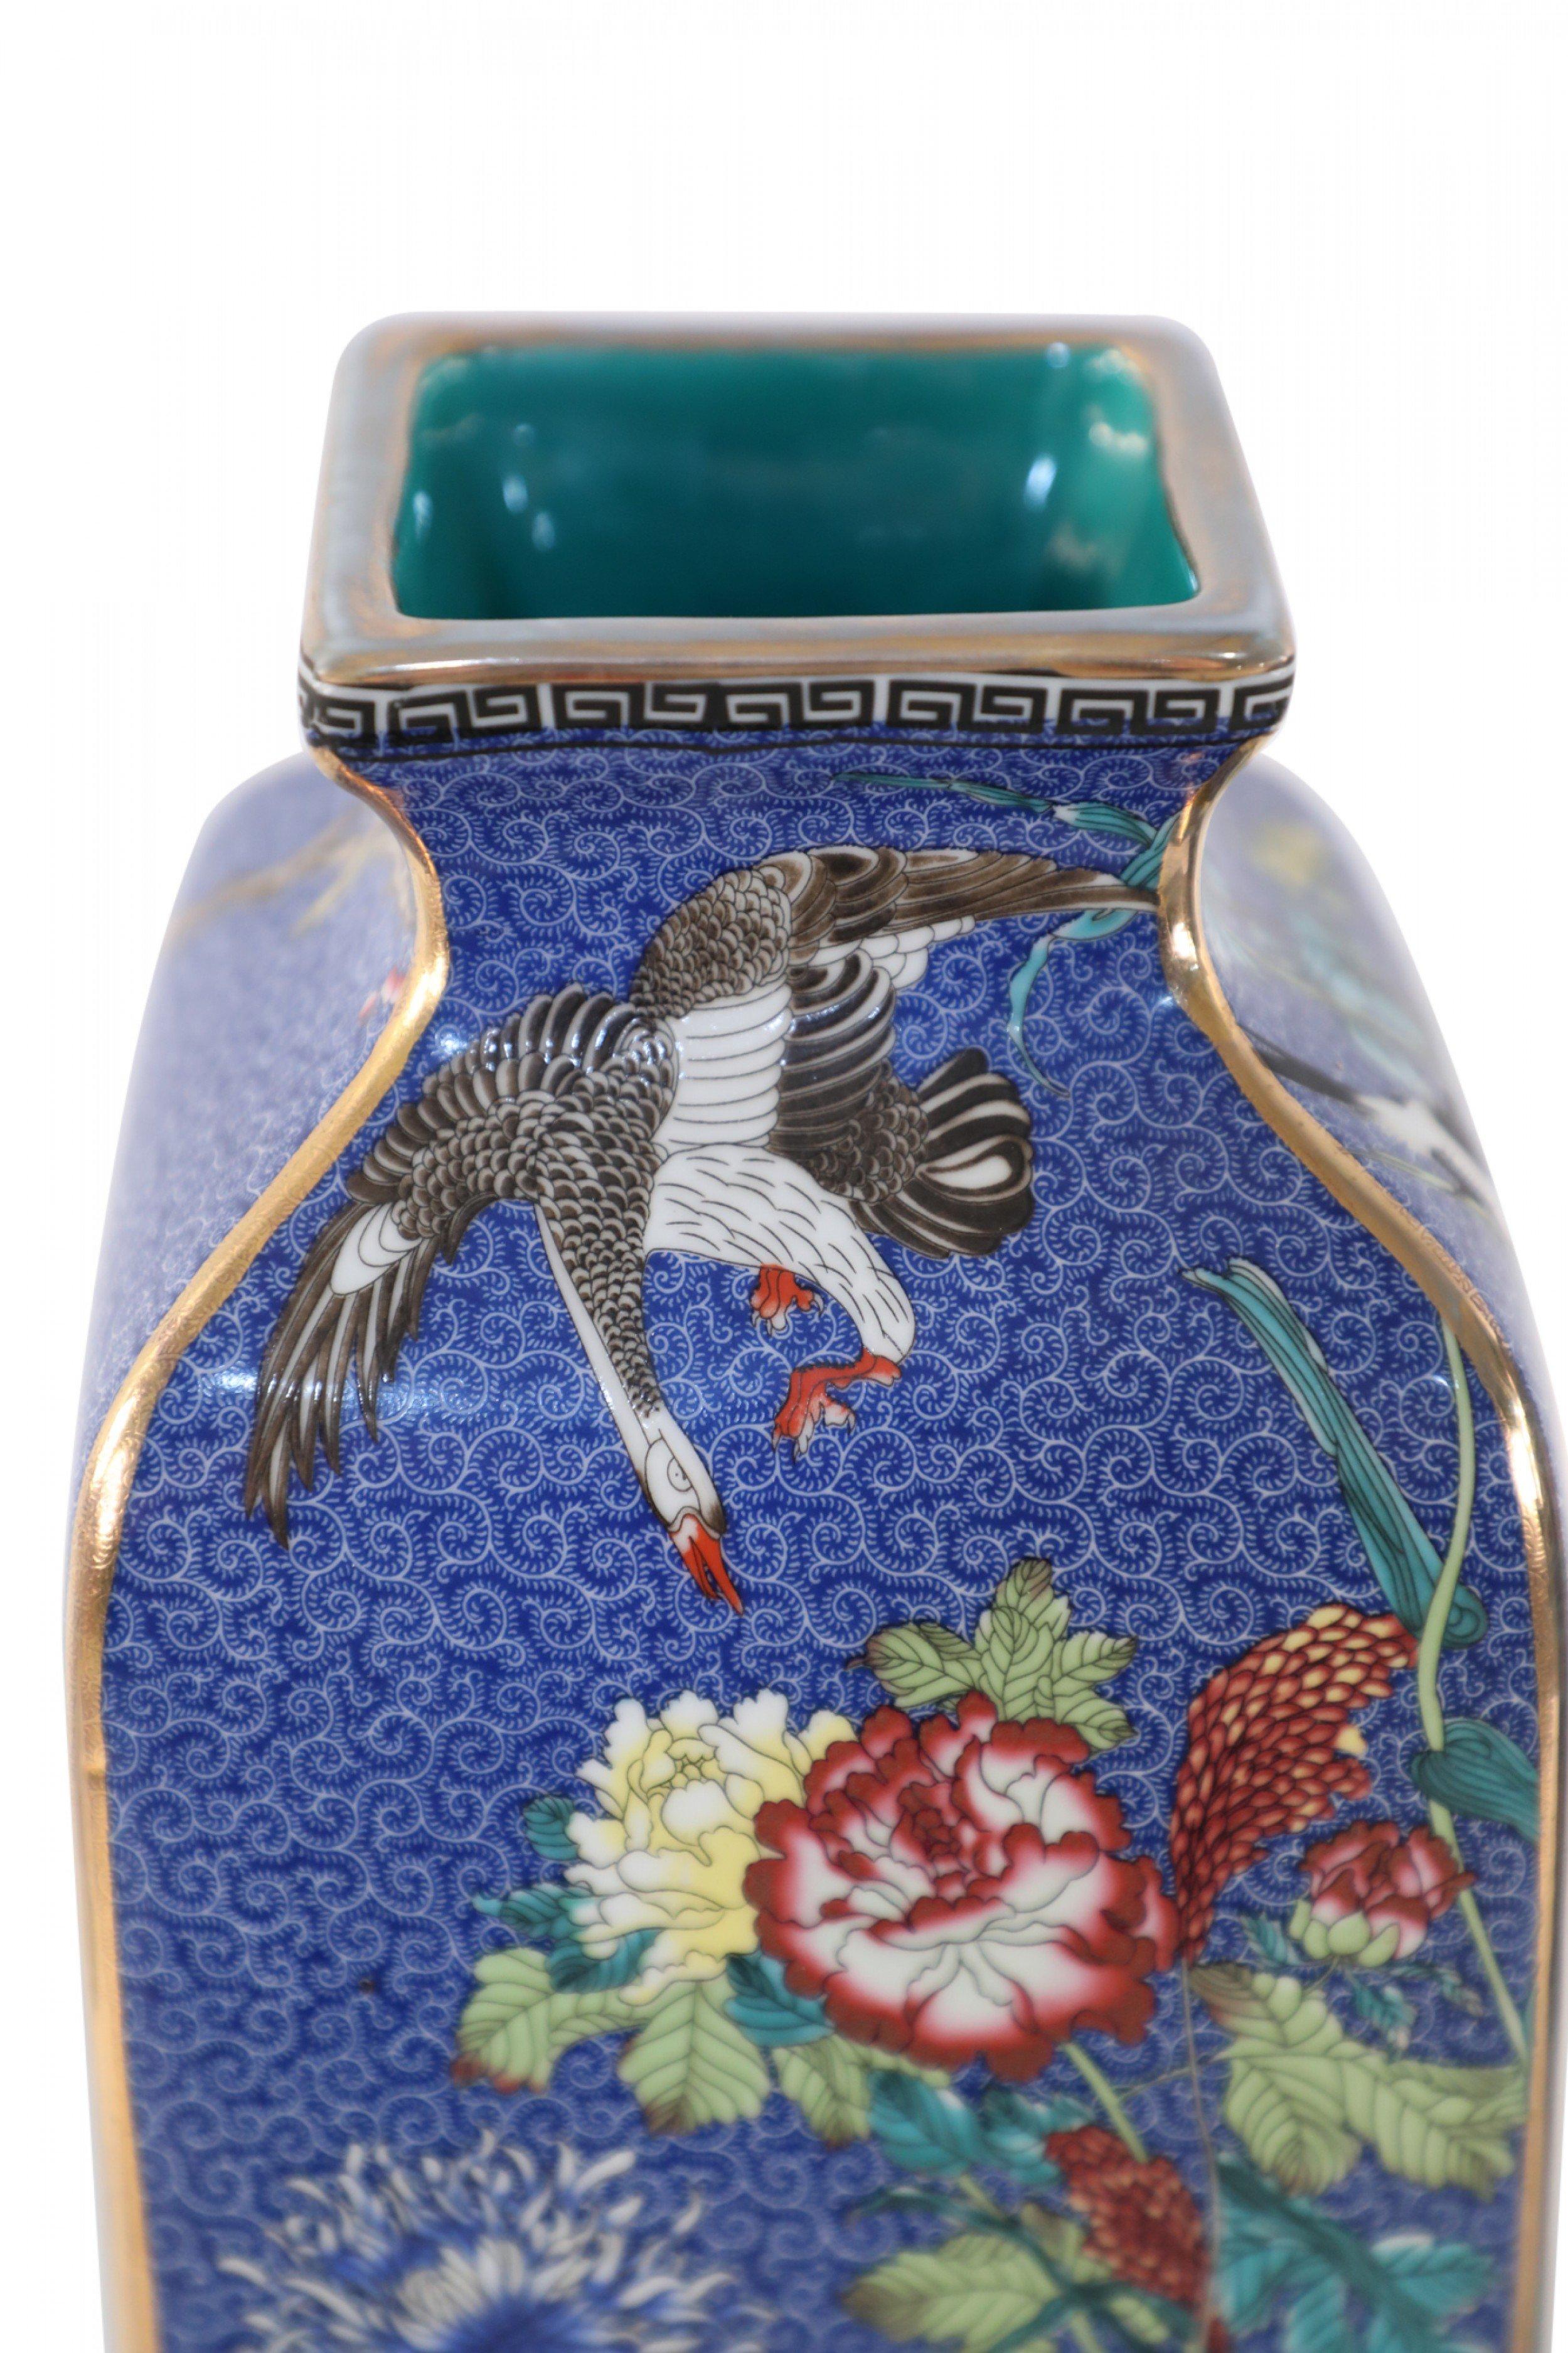 Pair of Chinese Qing Dynasty Qianlong Period (18th Century) blue porcelain sleeve vases, decorated with birds and butterflies amid colorful florals and a Greek key pattern along the tops and bases (date mark on bottom) (Priced as pair).
 